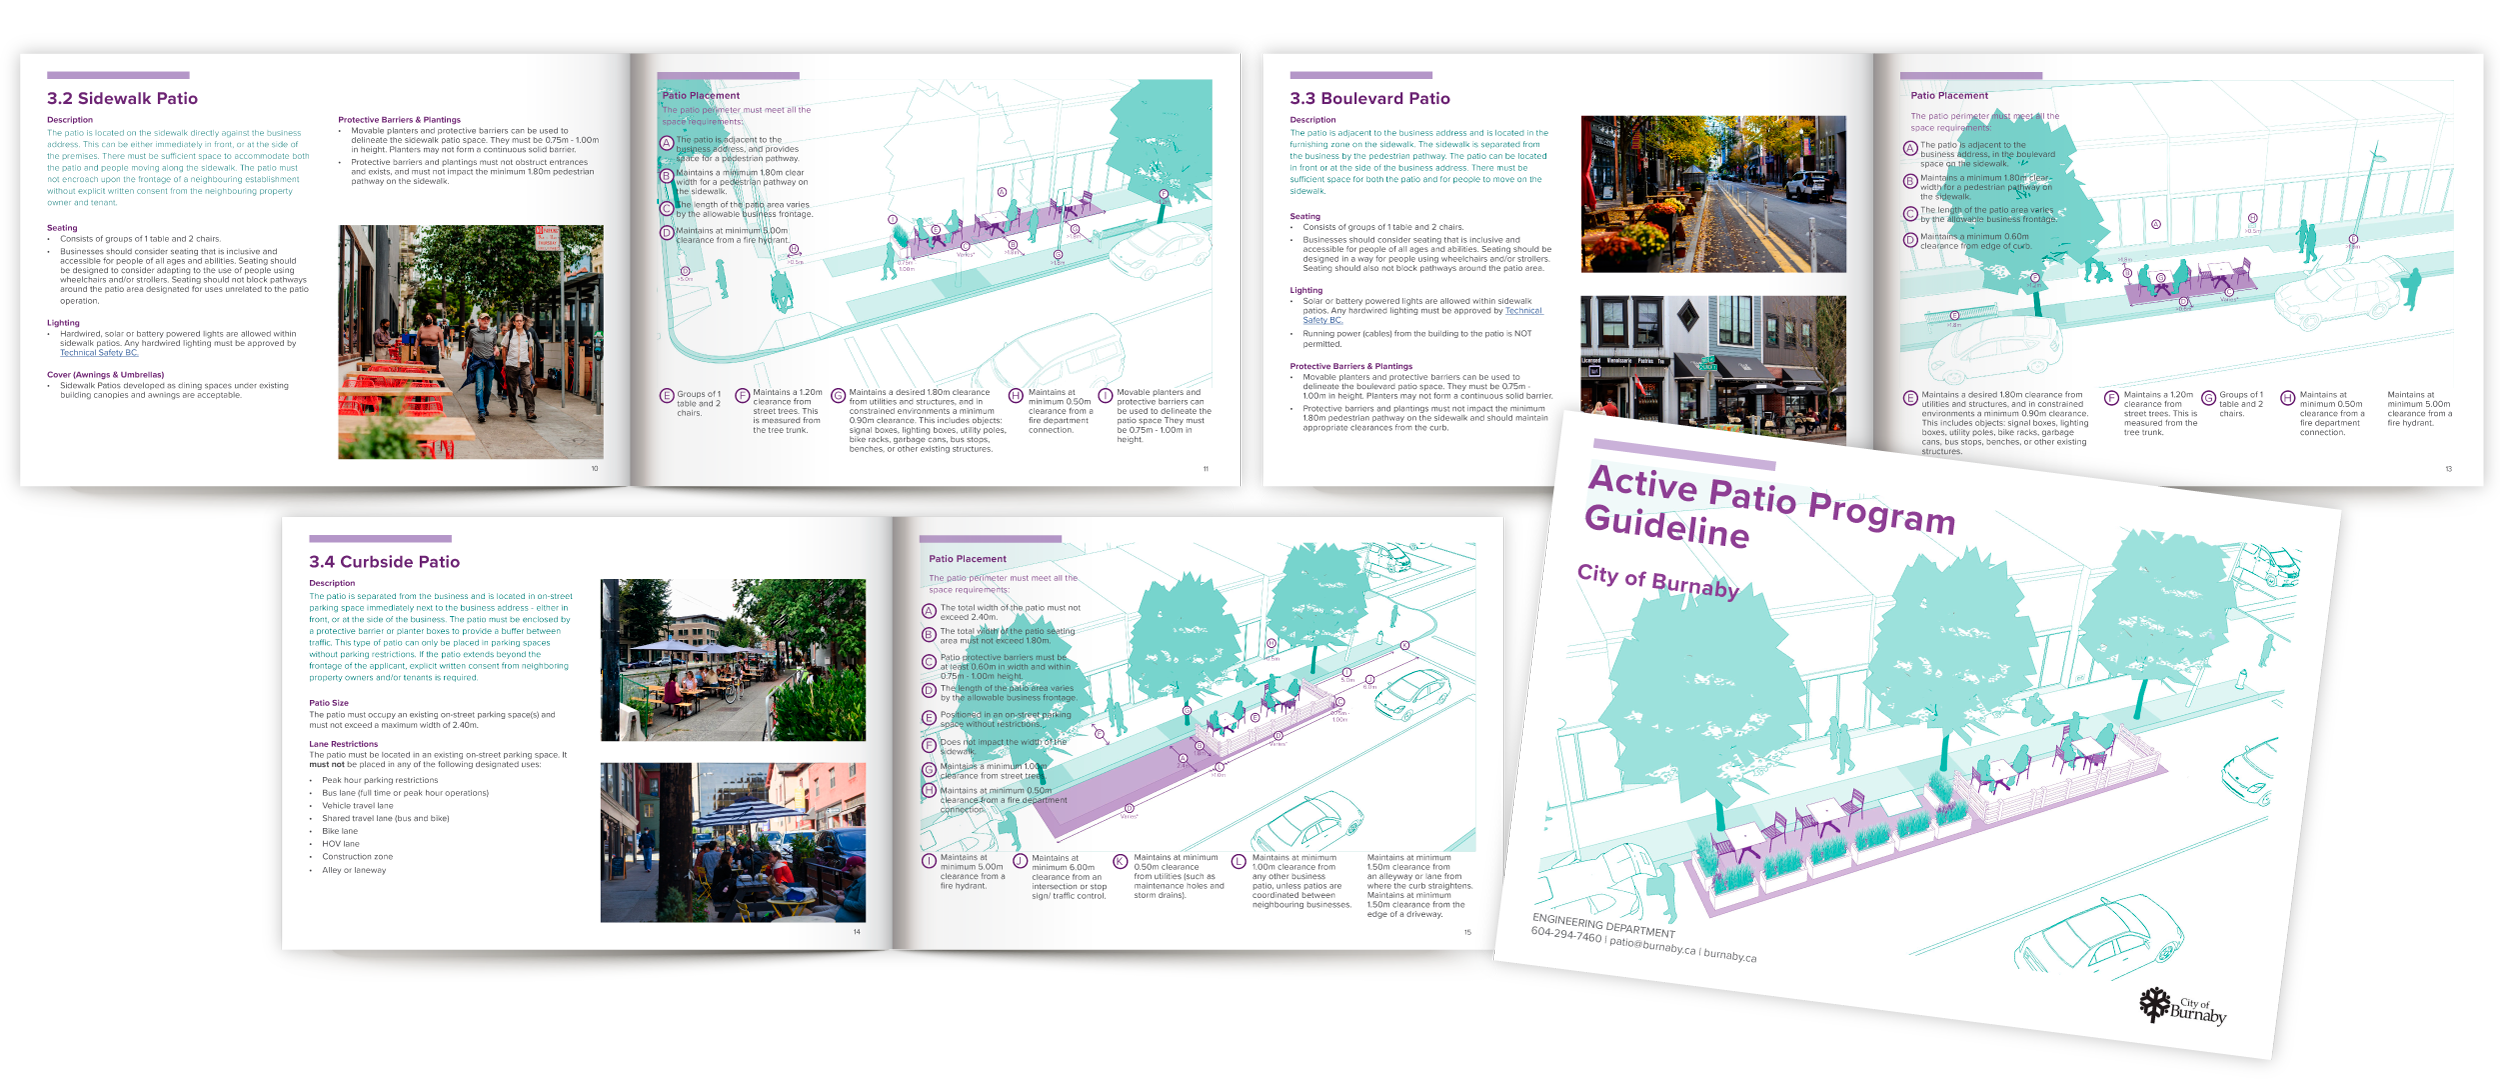 A mockup layout of the Active Patio Program and Patio Design Guidelines featuring a selected group of pages, developed for the City of Burnaby in British Columbia, Canada